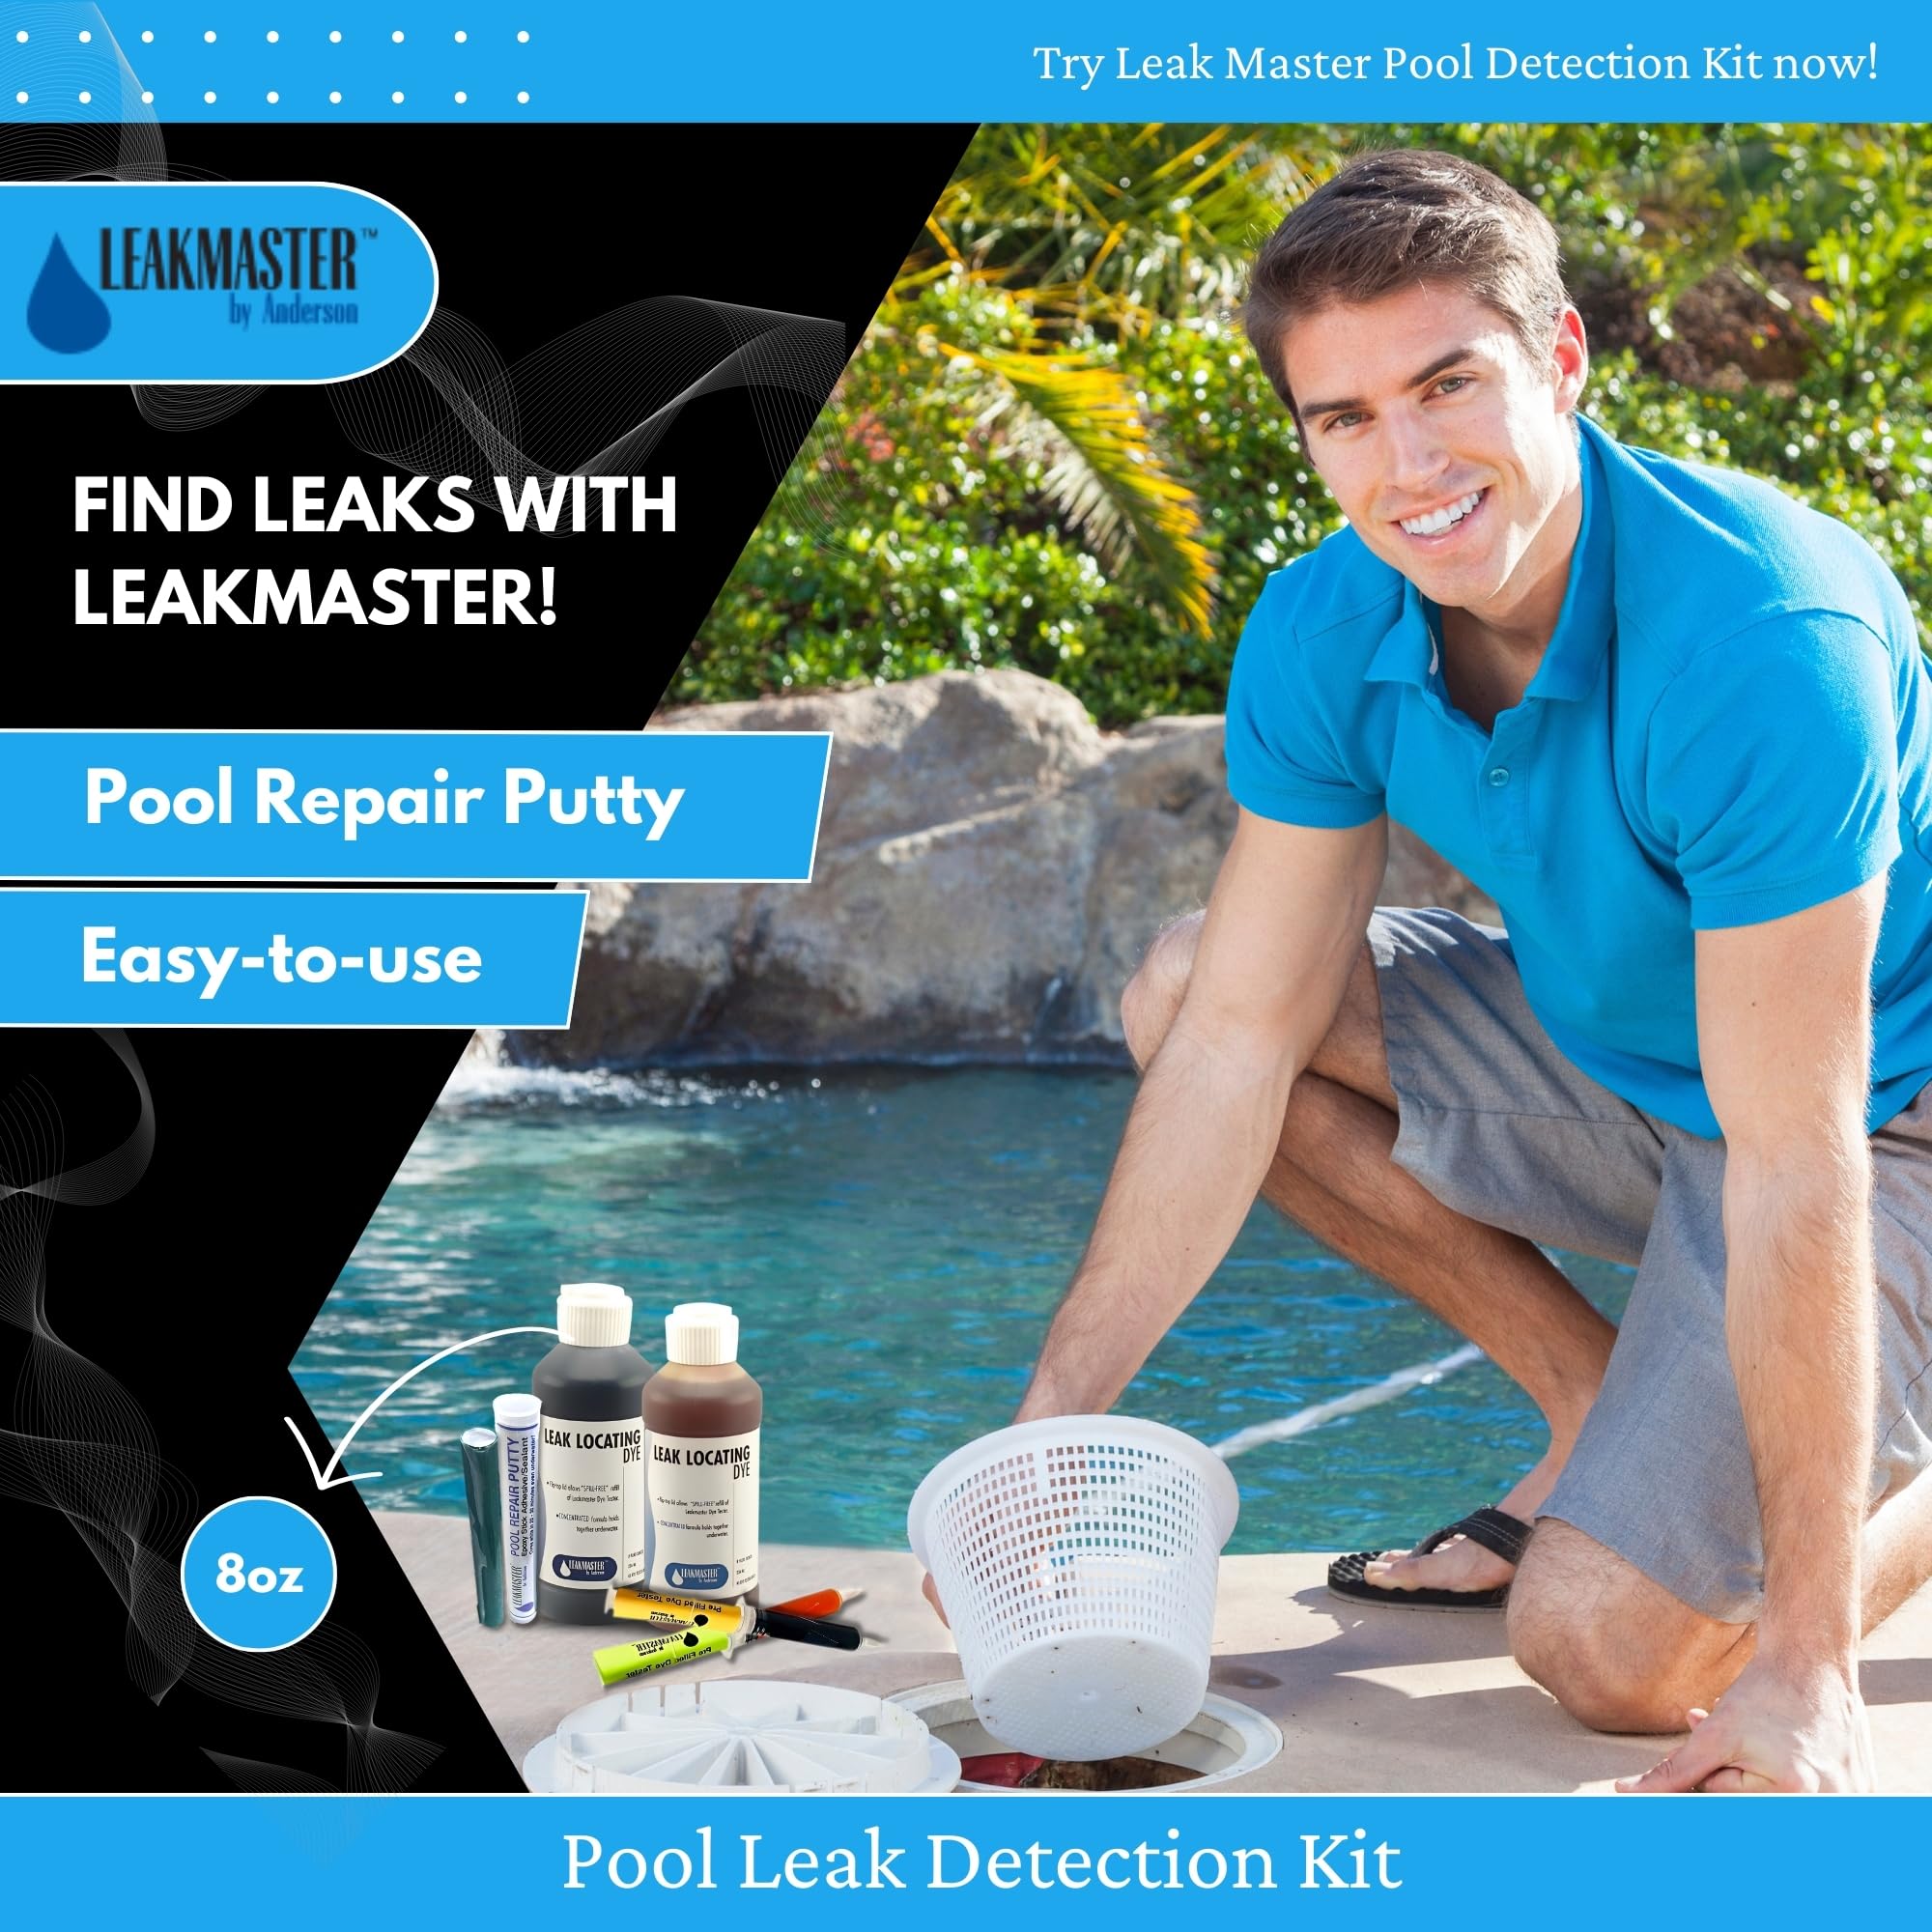 Pool Putty Epoxy Single Stick Leak Sealer for Leakmaster Anderson Manufacturing - Convenient & Versatile Pool Putty for Leaks Underwater -DIY Waterproof Epoxy Putty Stick for Spa & Hot Tub Leak Sealer